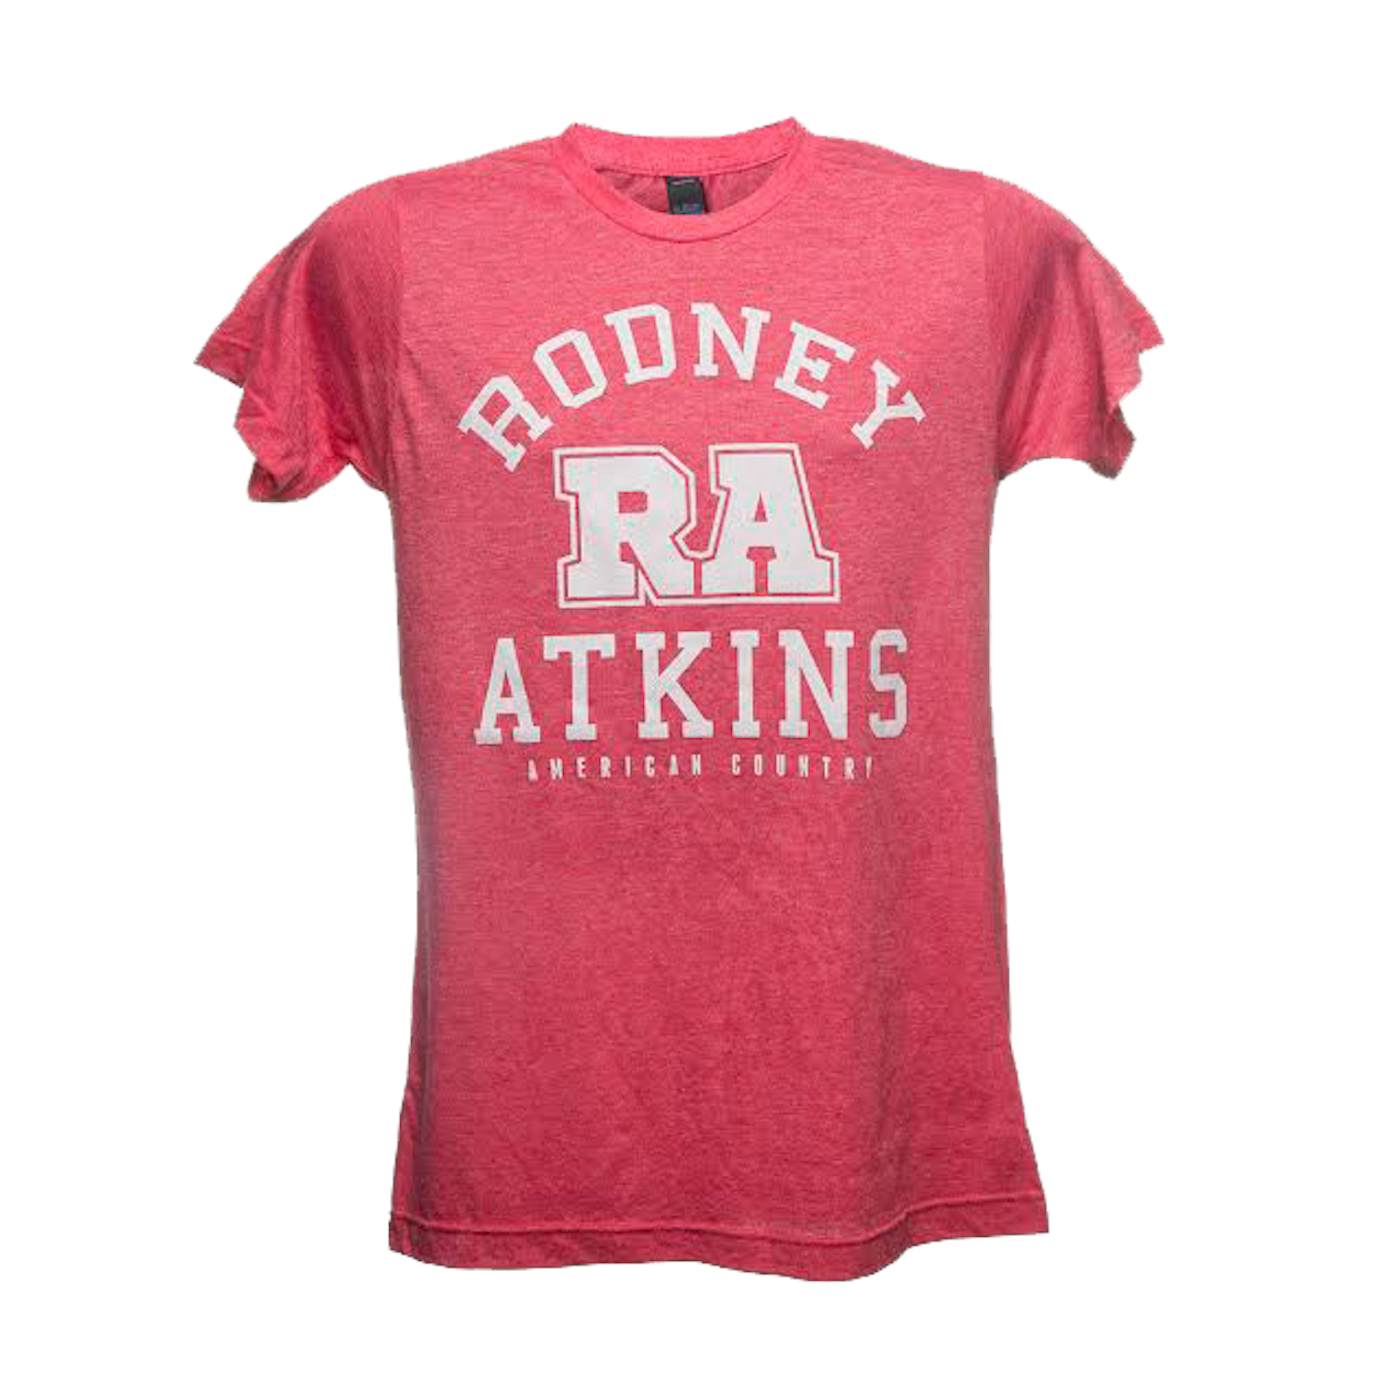 Rodney Atkins Red American Country Tee